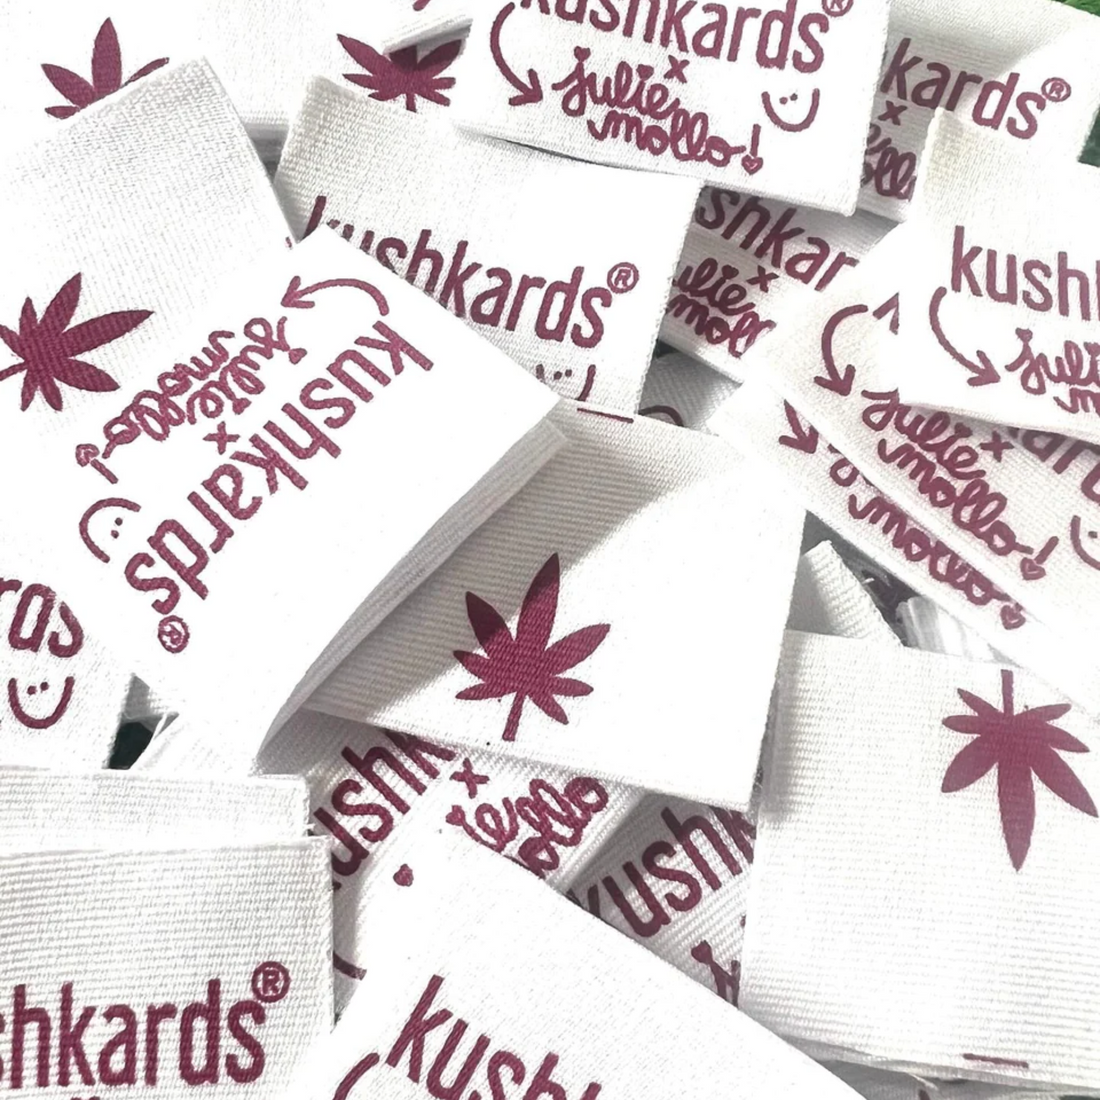 Pile of white KushKards x Julie Mollo collaboration tags with a cannabis leaf and logo.